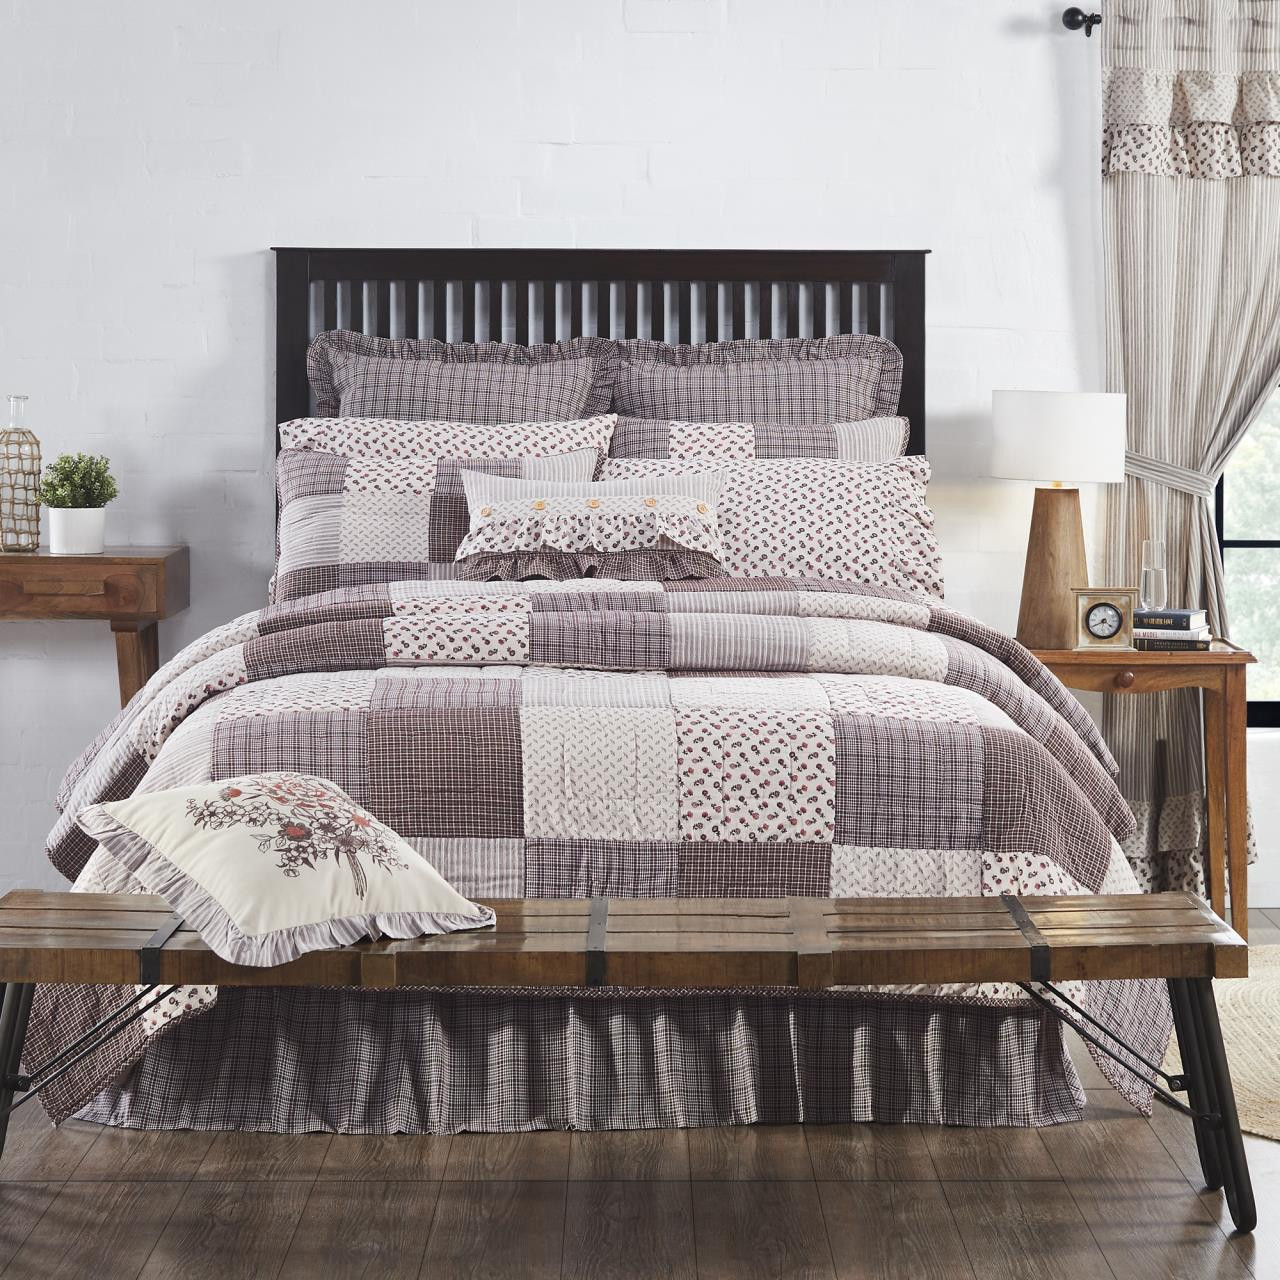 Florette French Country Farmhouse Bedding Collection -